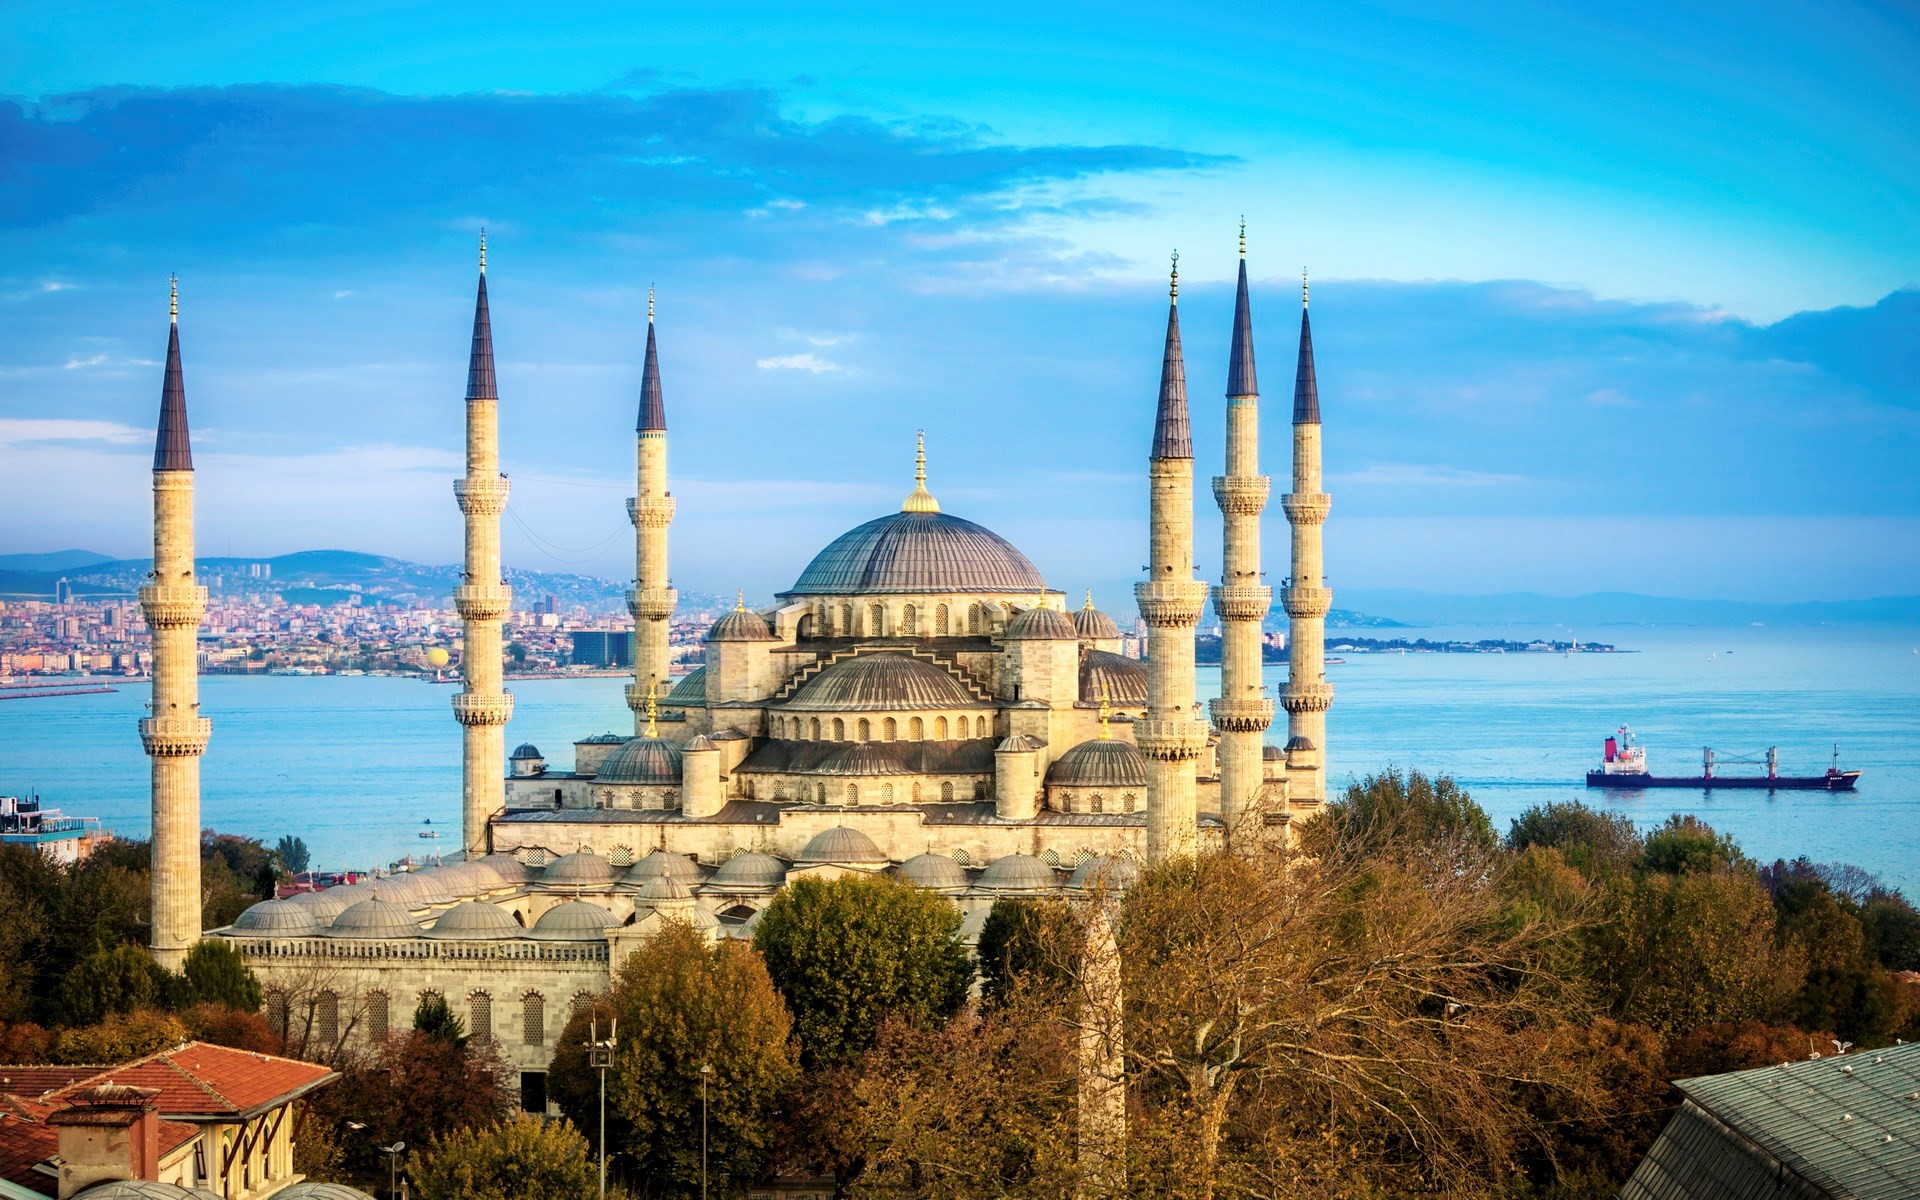 Free Awesome Sultan Ahmed Mosque Backround Quantay Edwards 2022 03 12 1920x1200